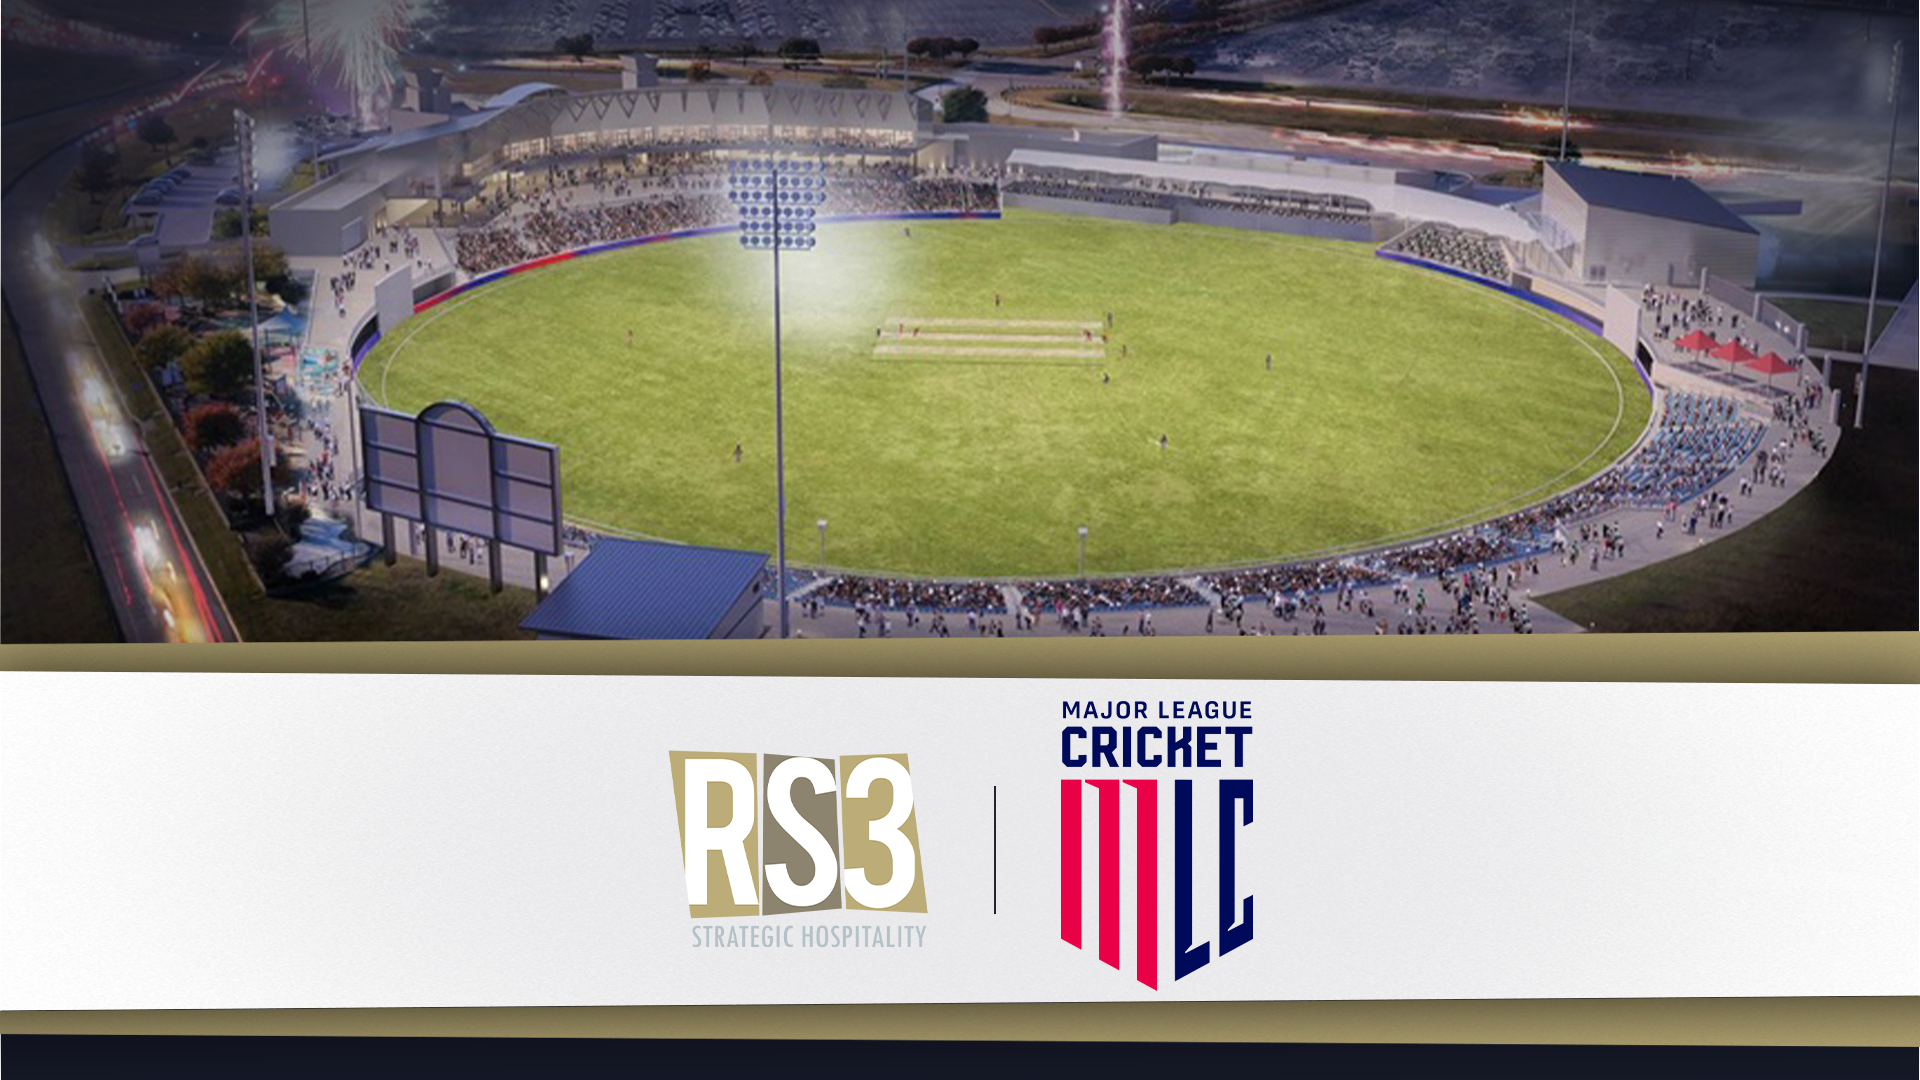 RS3 Strategic Hospitality to Become Official Hospitality Provider for Grand Prairie Cricket Stadium